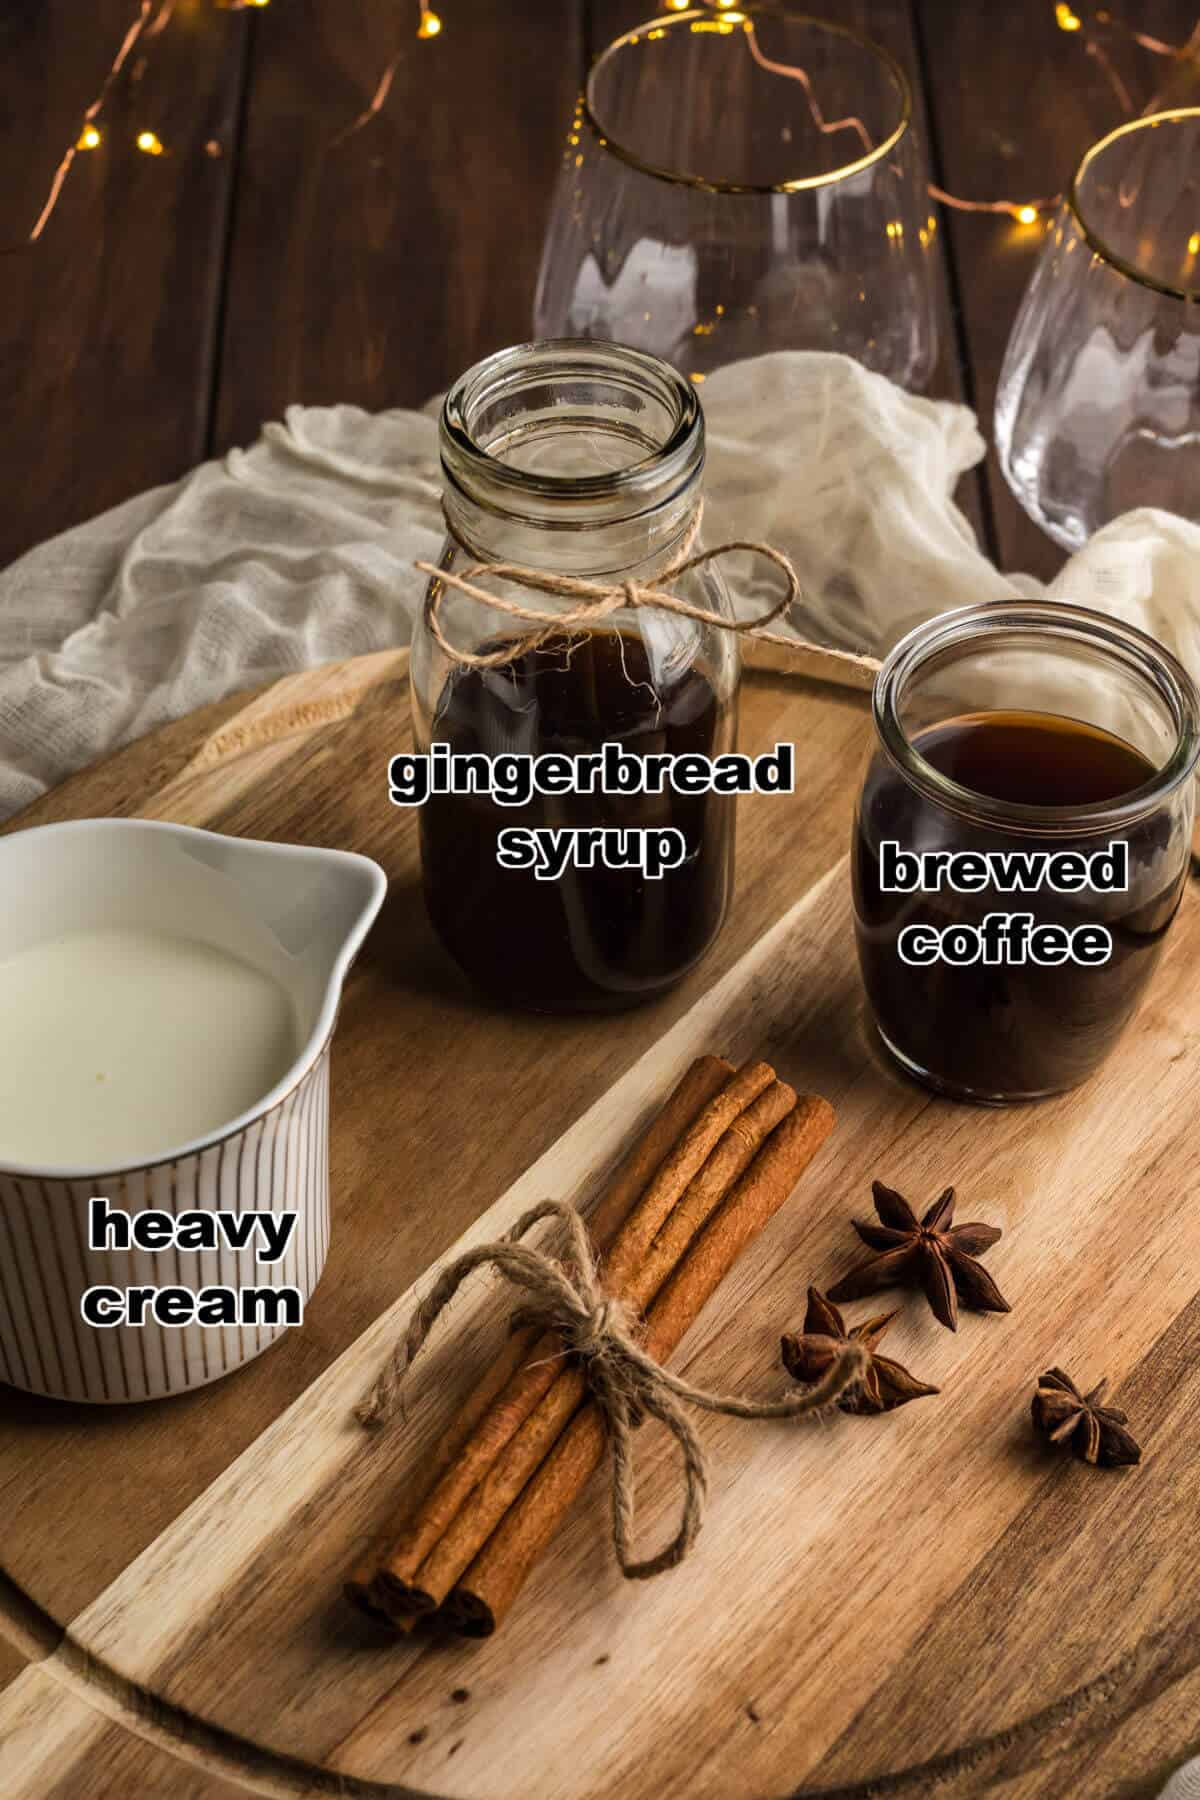 Ingredients to make a non-alcoholic gingerbread White Russian.